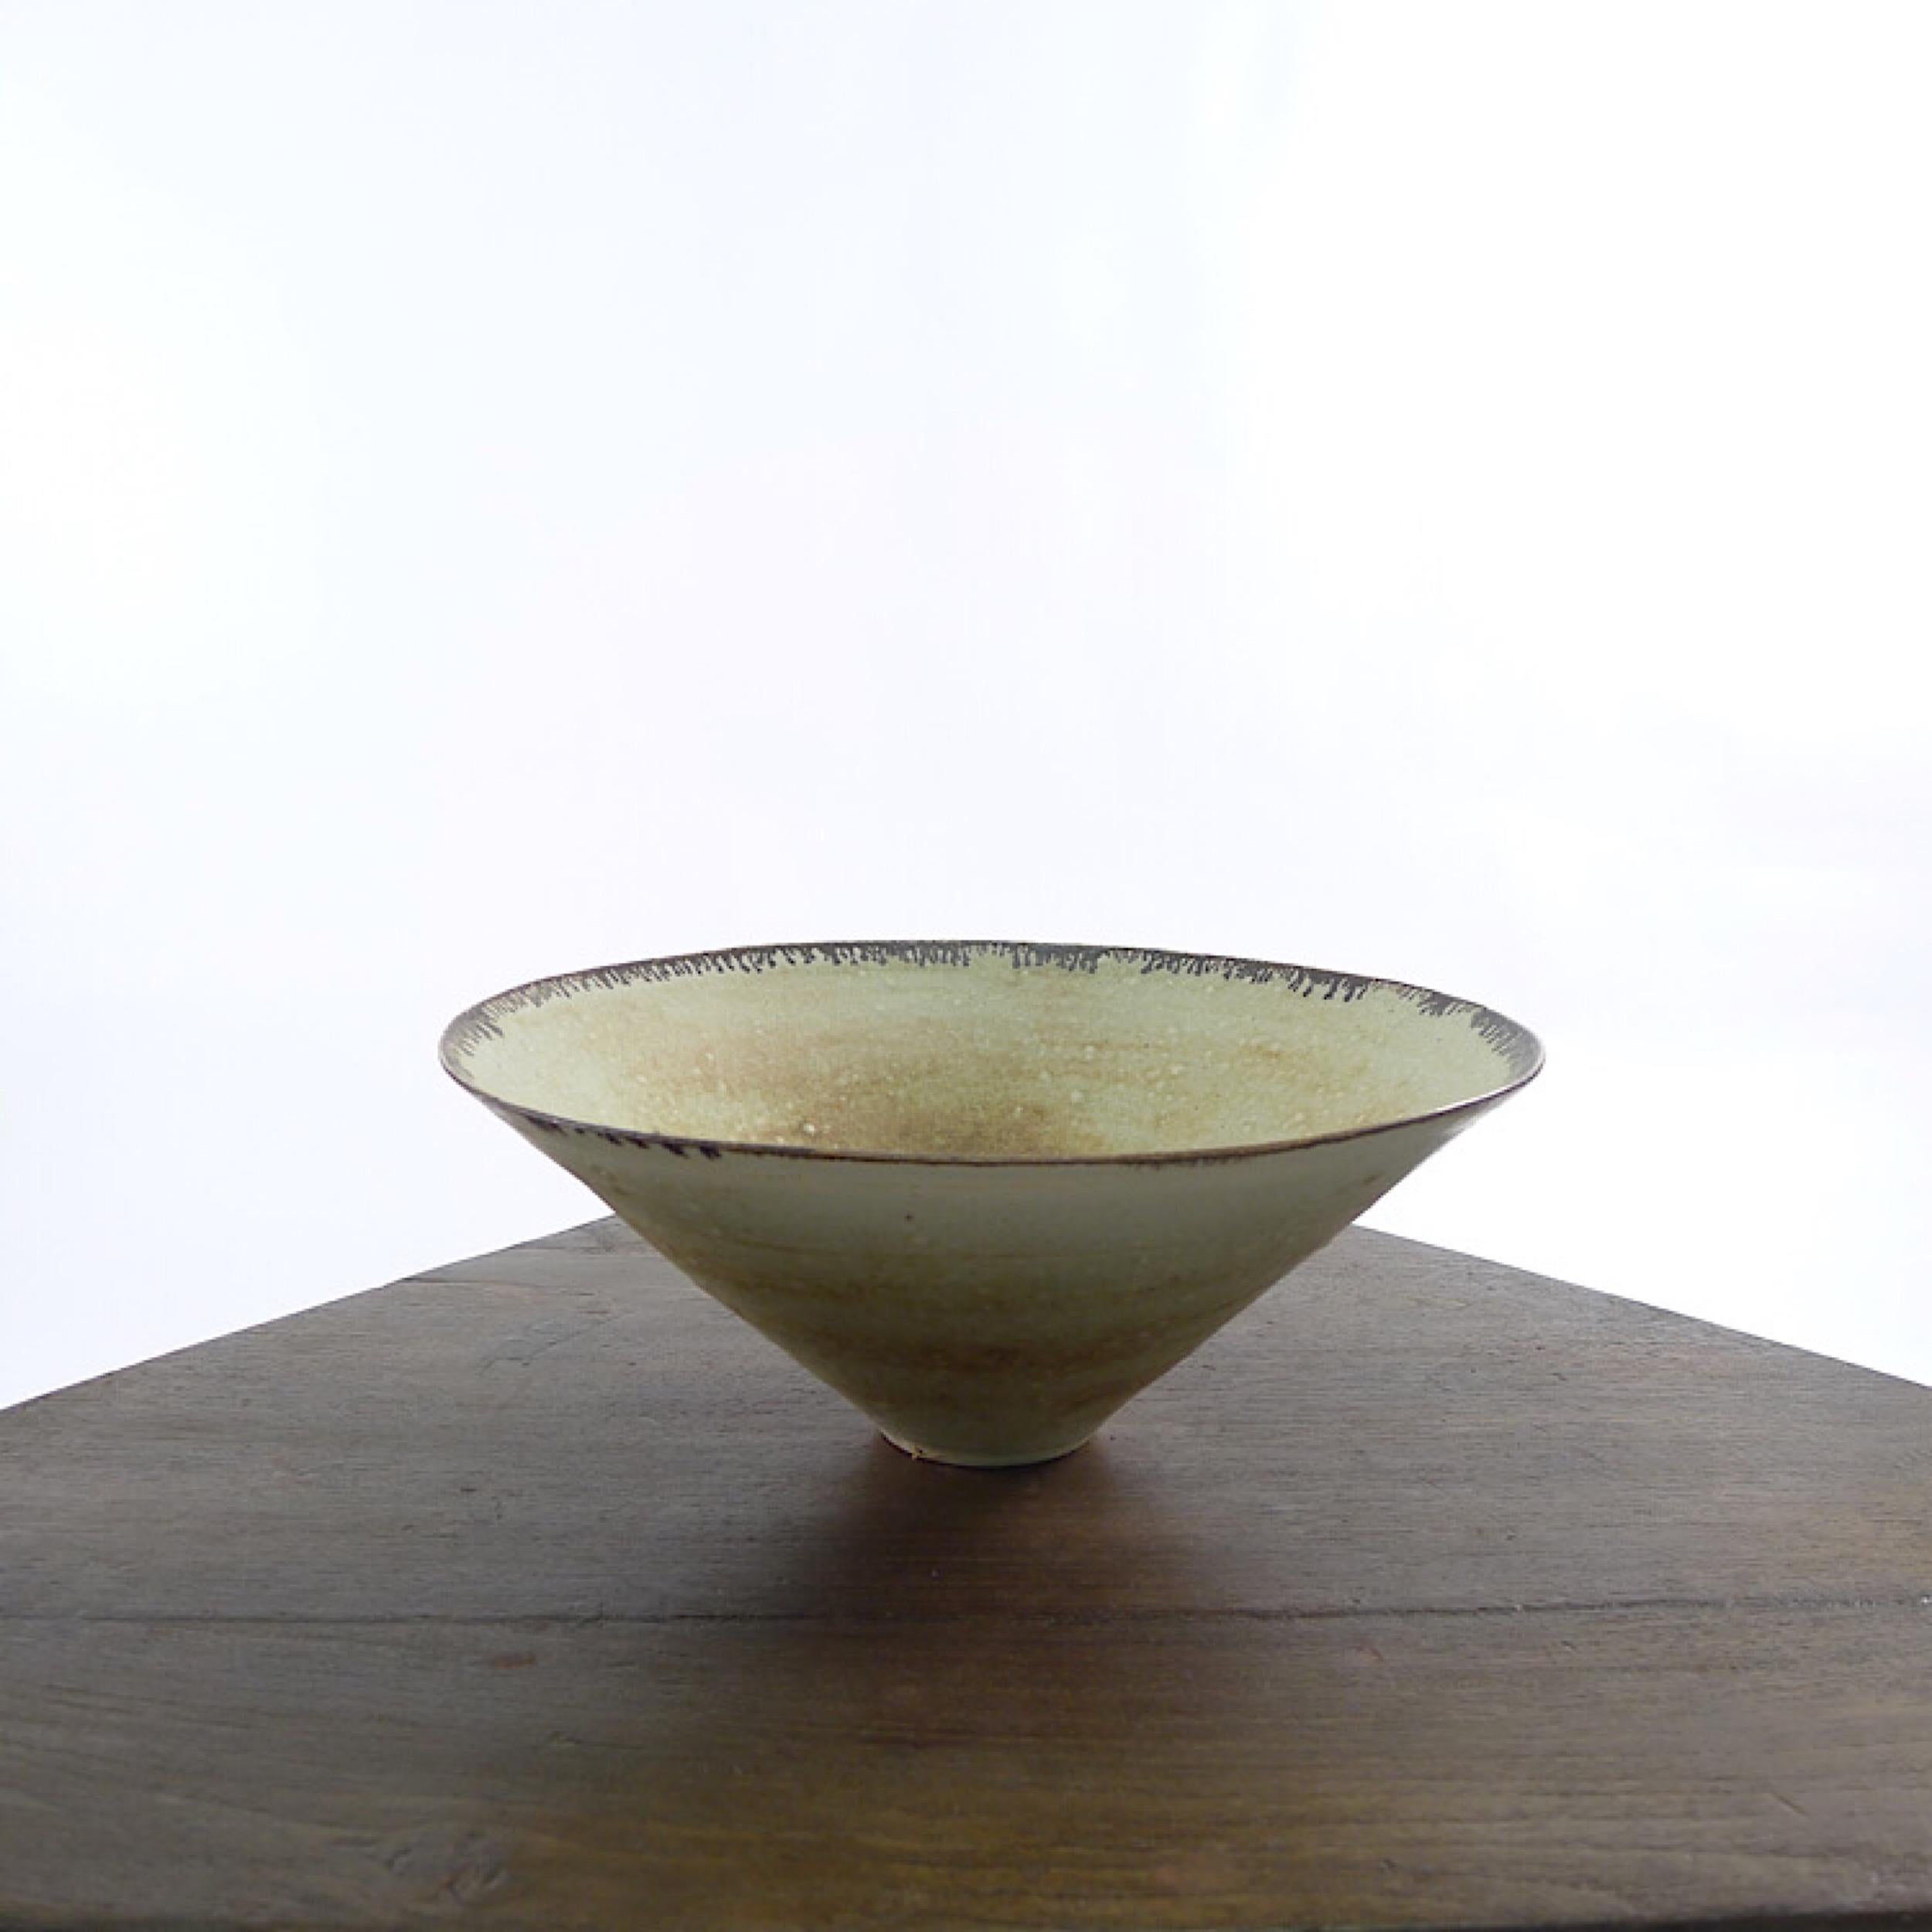 British Lucie Rie, Porcelain Bowl, Flaring Conical Form, Impressed Seal Mark